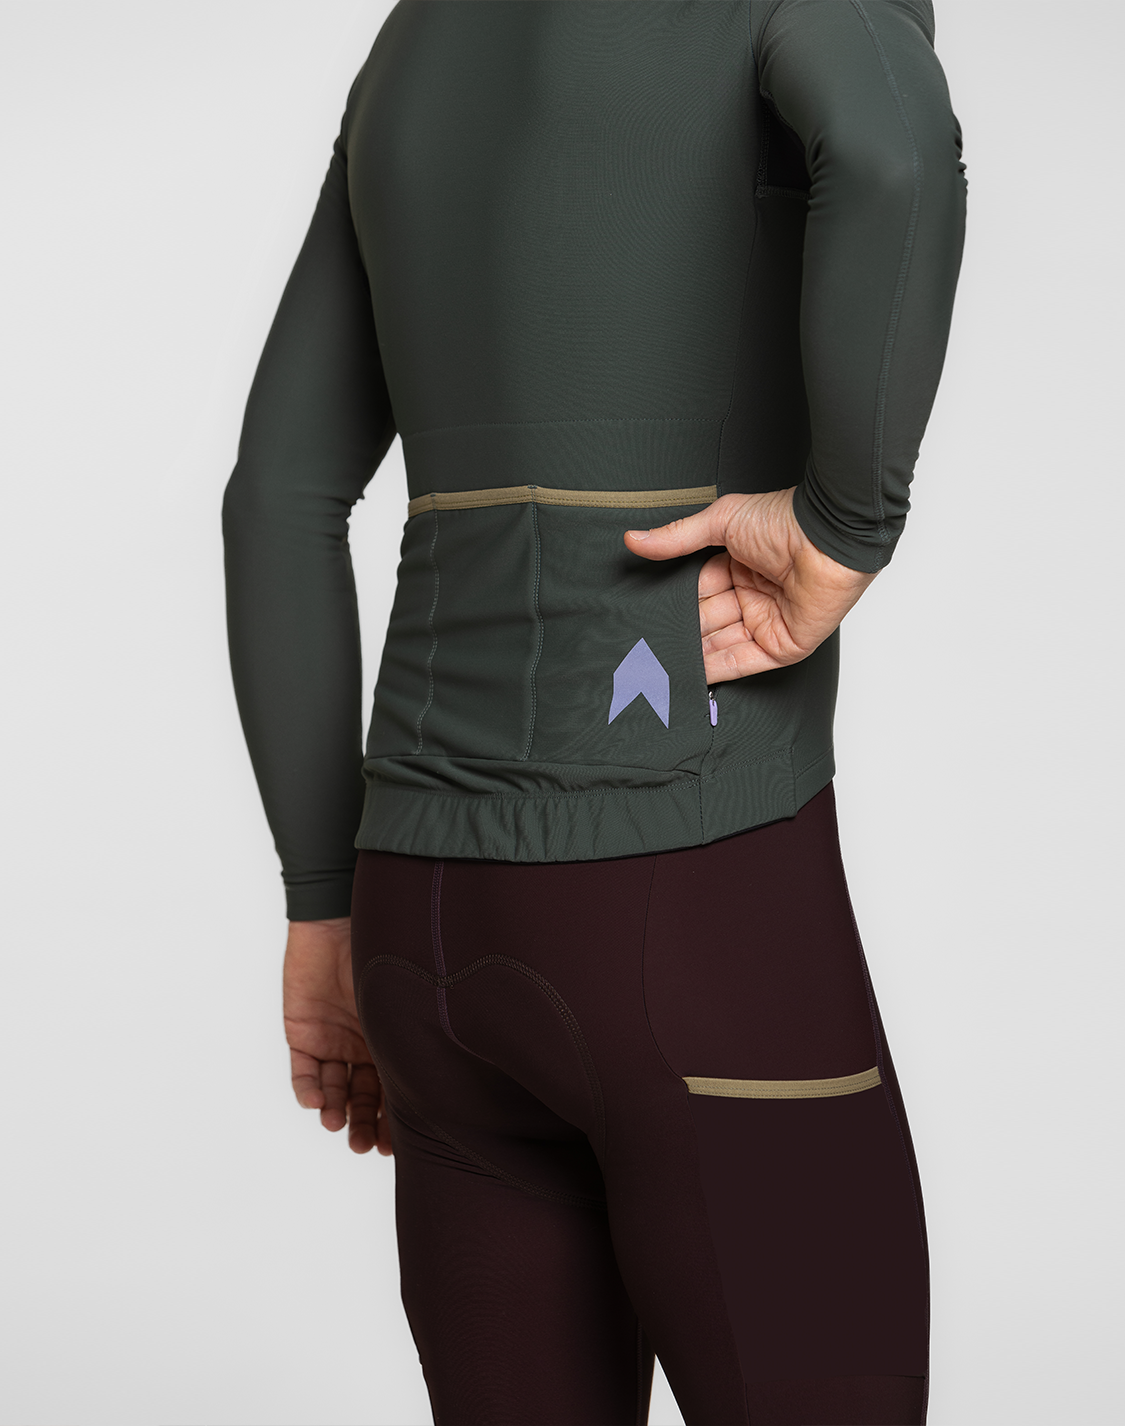 Men's Set Yourself Free Thermal Jersey — Ash Forest